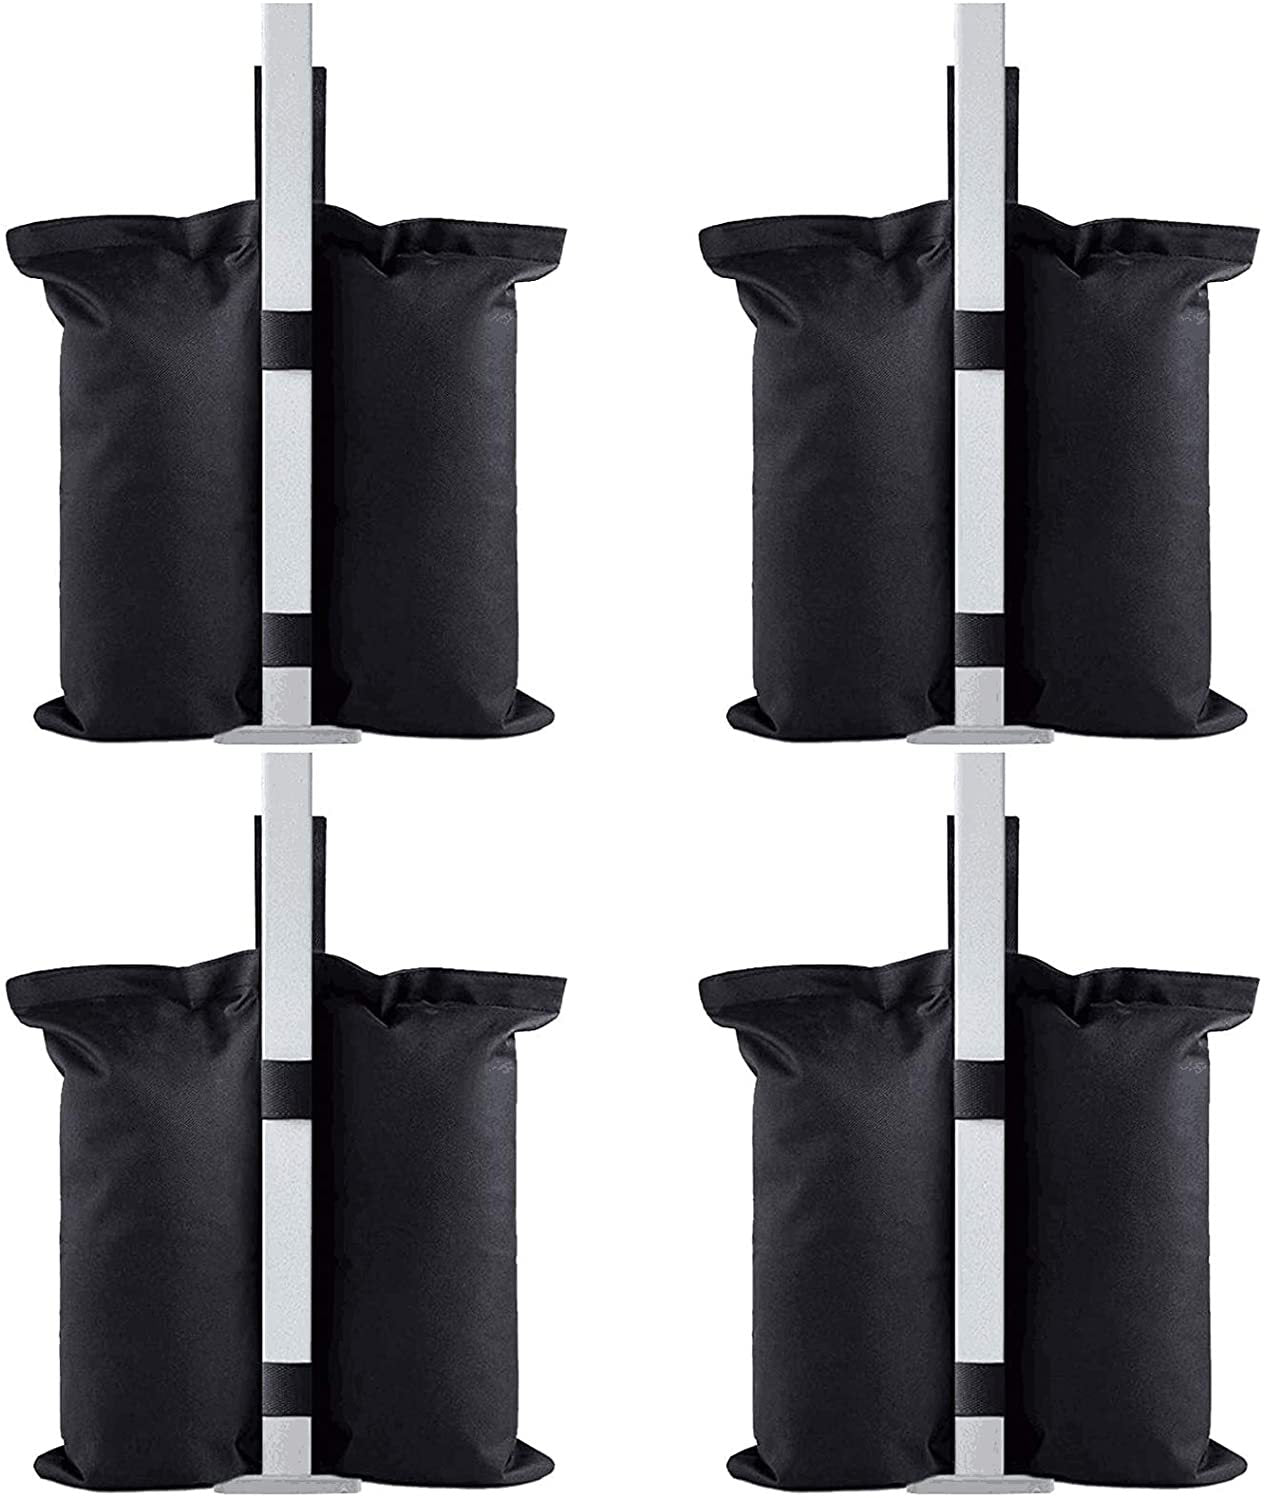 4Pcs 600D Canopy Weight Bags for Canopy Tent Sand Bags Leg Weights